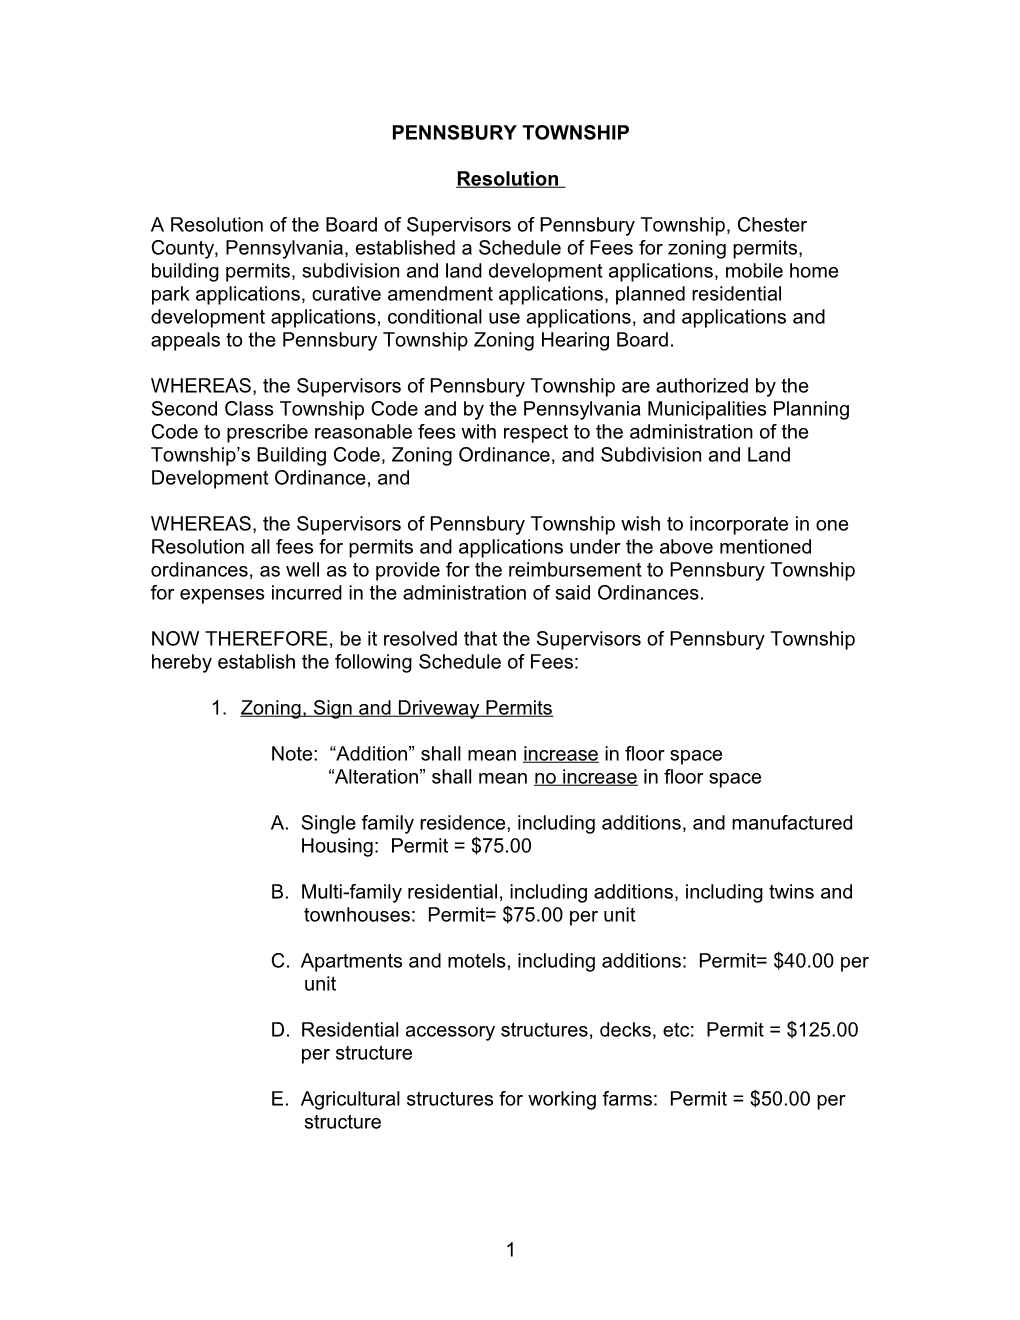 A Resolution of the Board of Supervisors of Pennsbury Township, Chester County, Pennsylvania